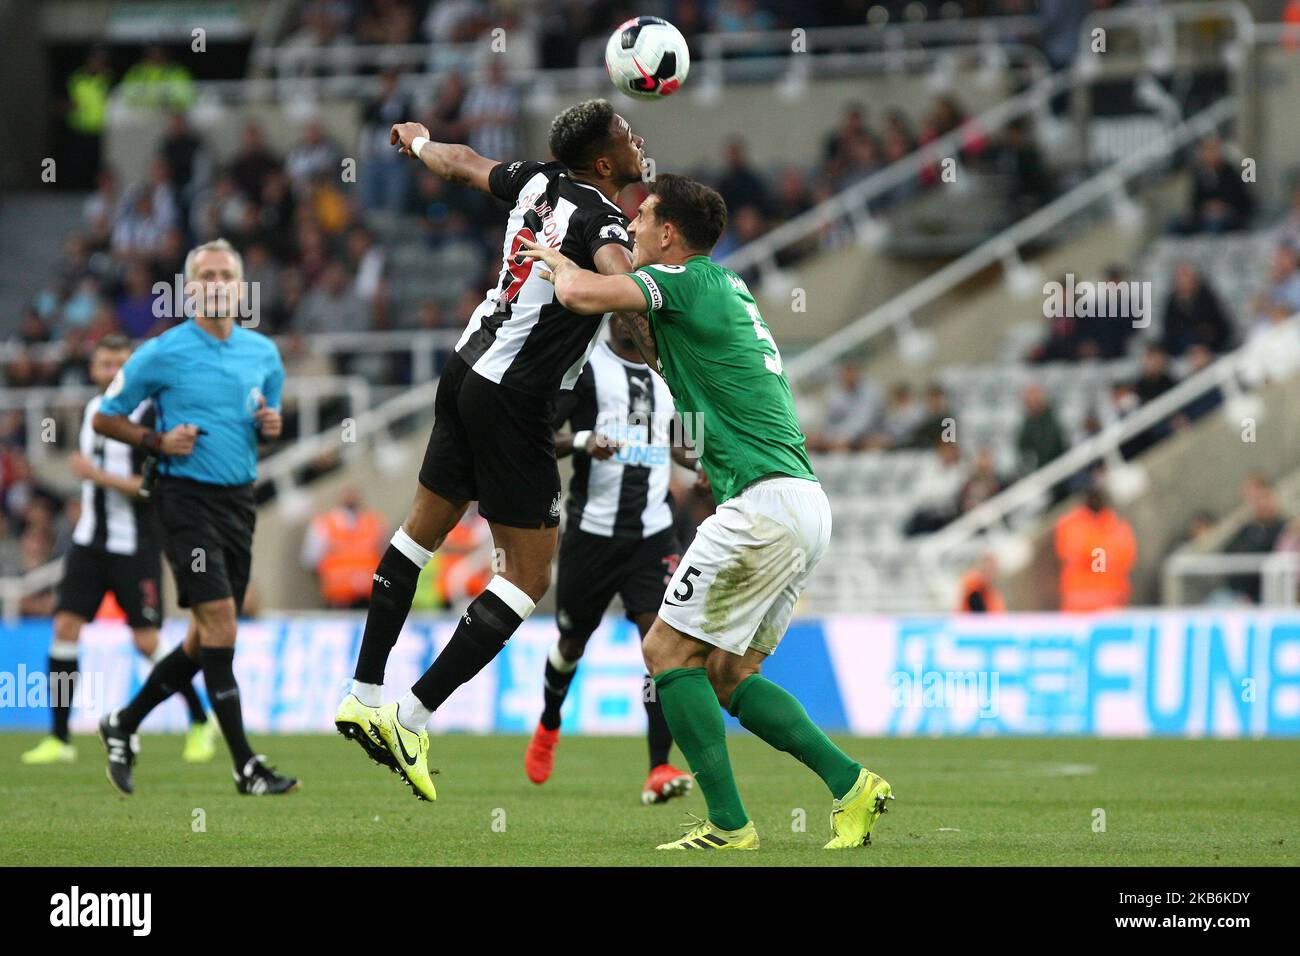 Newcastle United's Joelinton competes for the ball with Brighton & Hove Albion's Lewis Dunk during the Premier League match between Newcastle United and Brighton and Hove Albion at St. James's Park, Newcastle on Saturday 21st September 2019. (Photo by Steven Hadlow/MI News/NurPhoto) Stock Photo